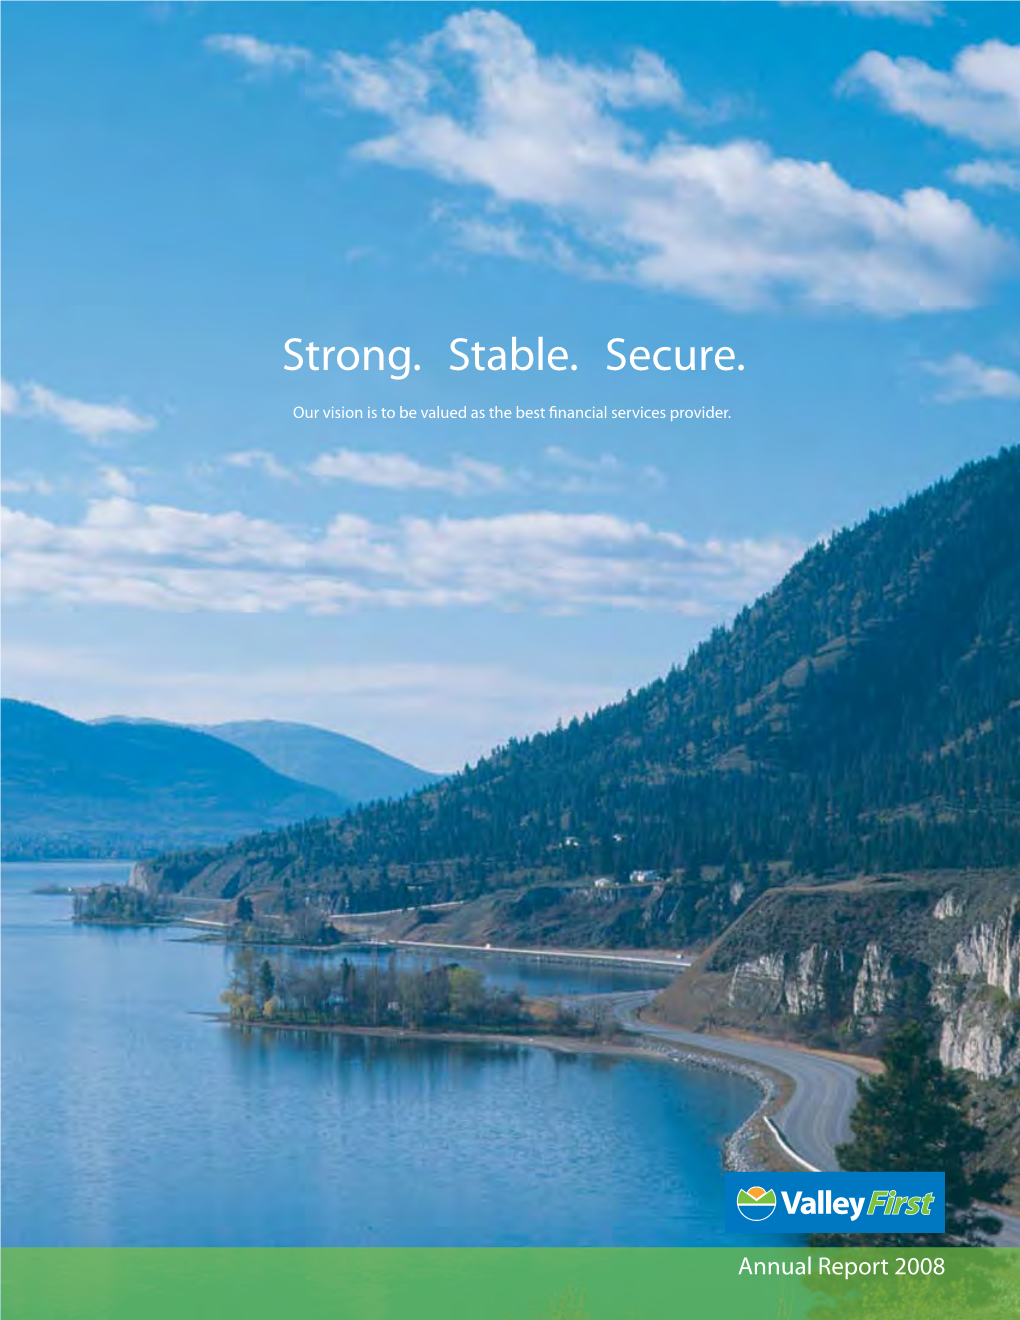 Strong. Stable. Secure